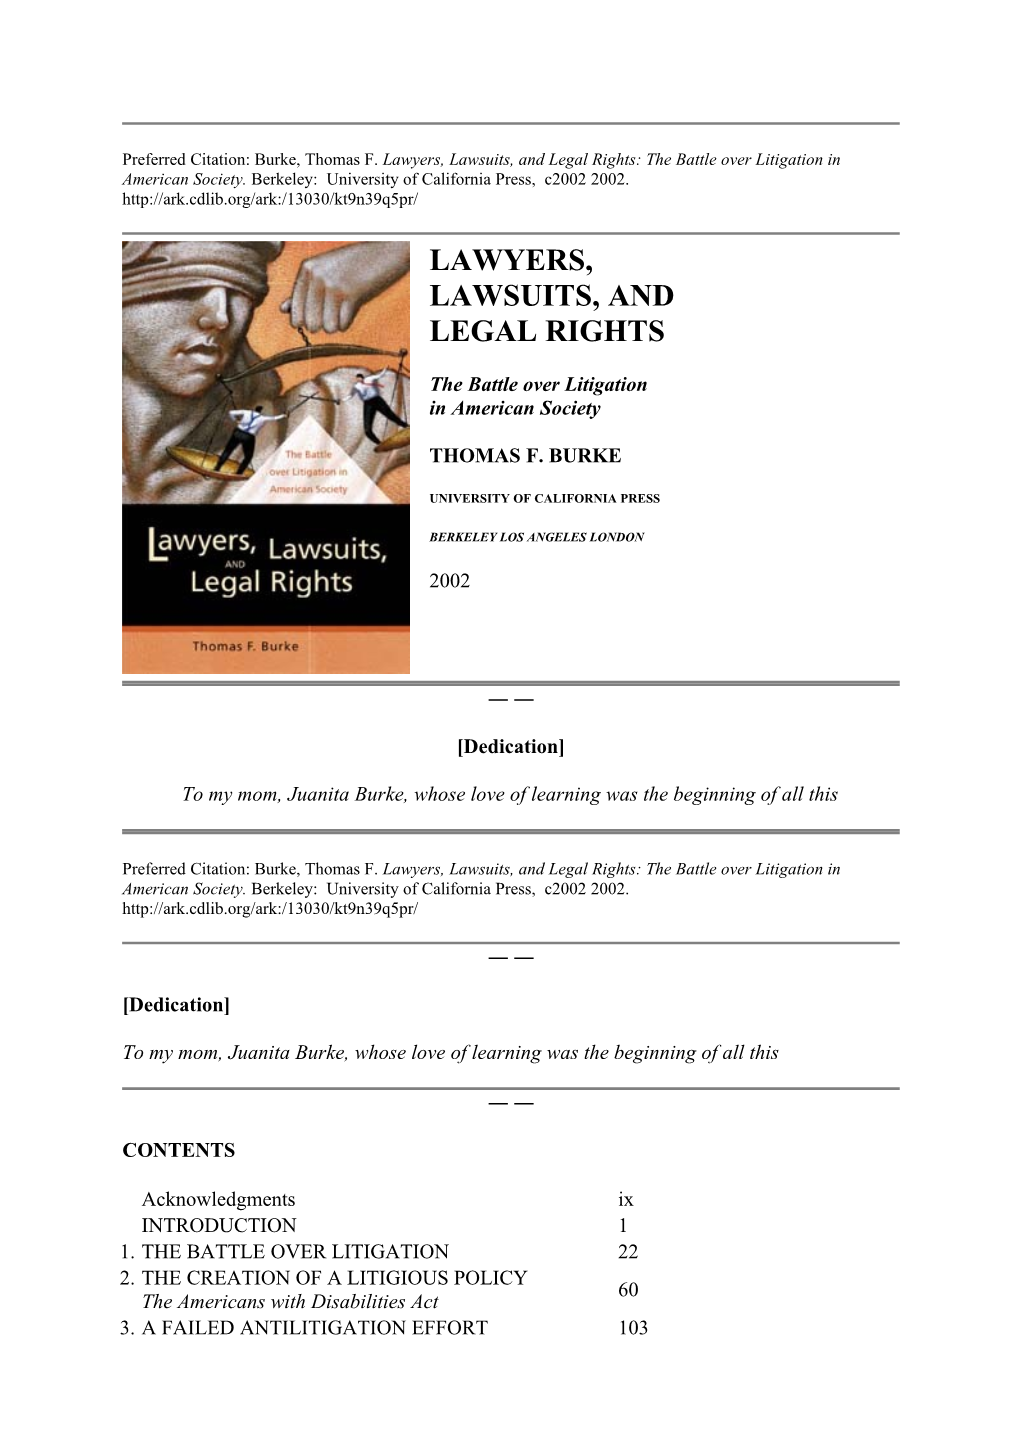 Lawyers, Lawsuits, and Legal Rights: the Battle Over Litigation in American Society